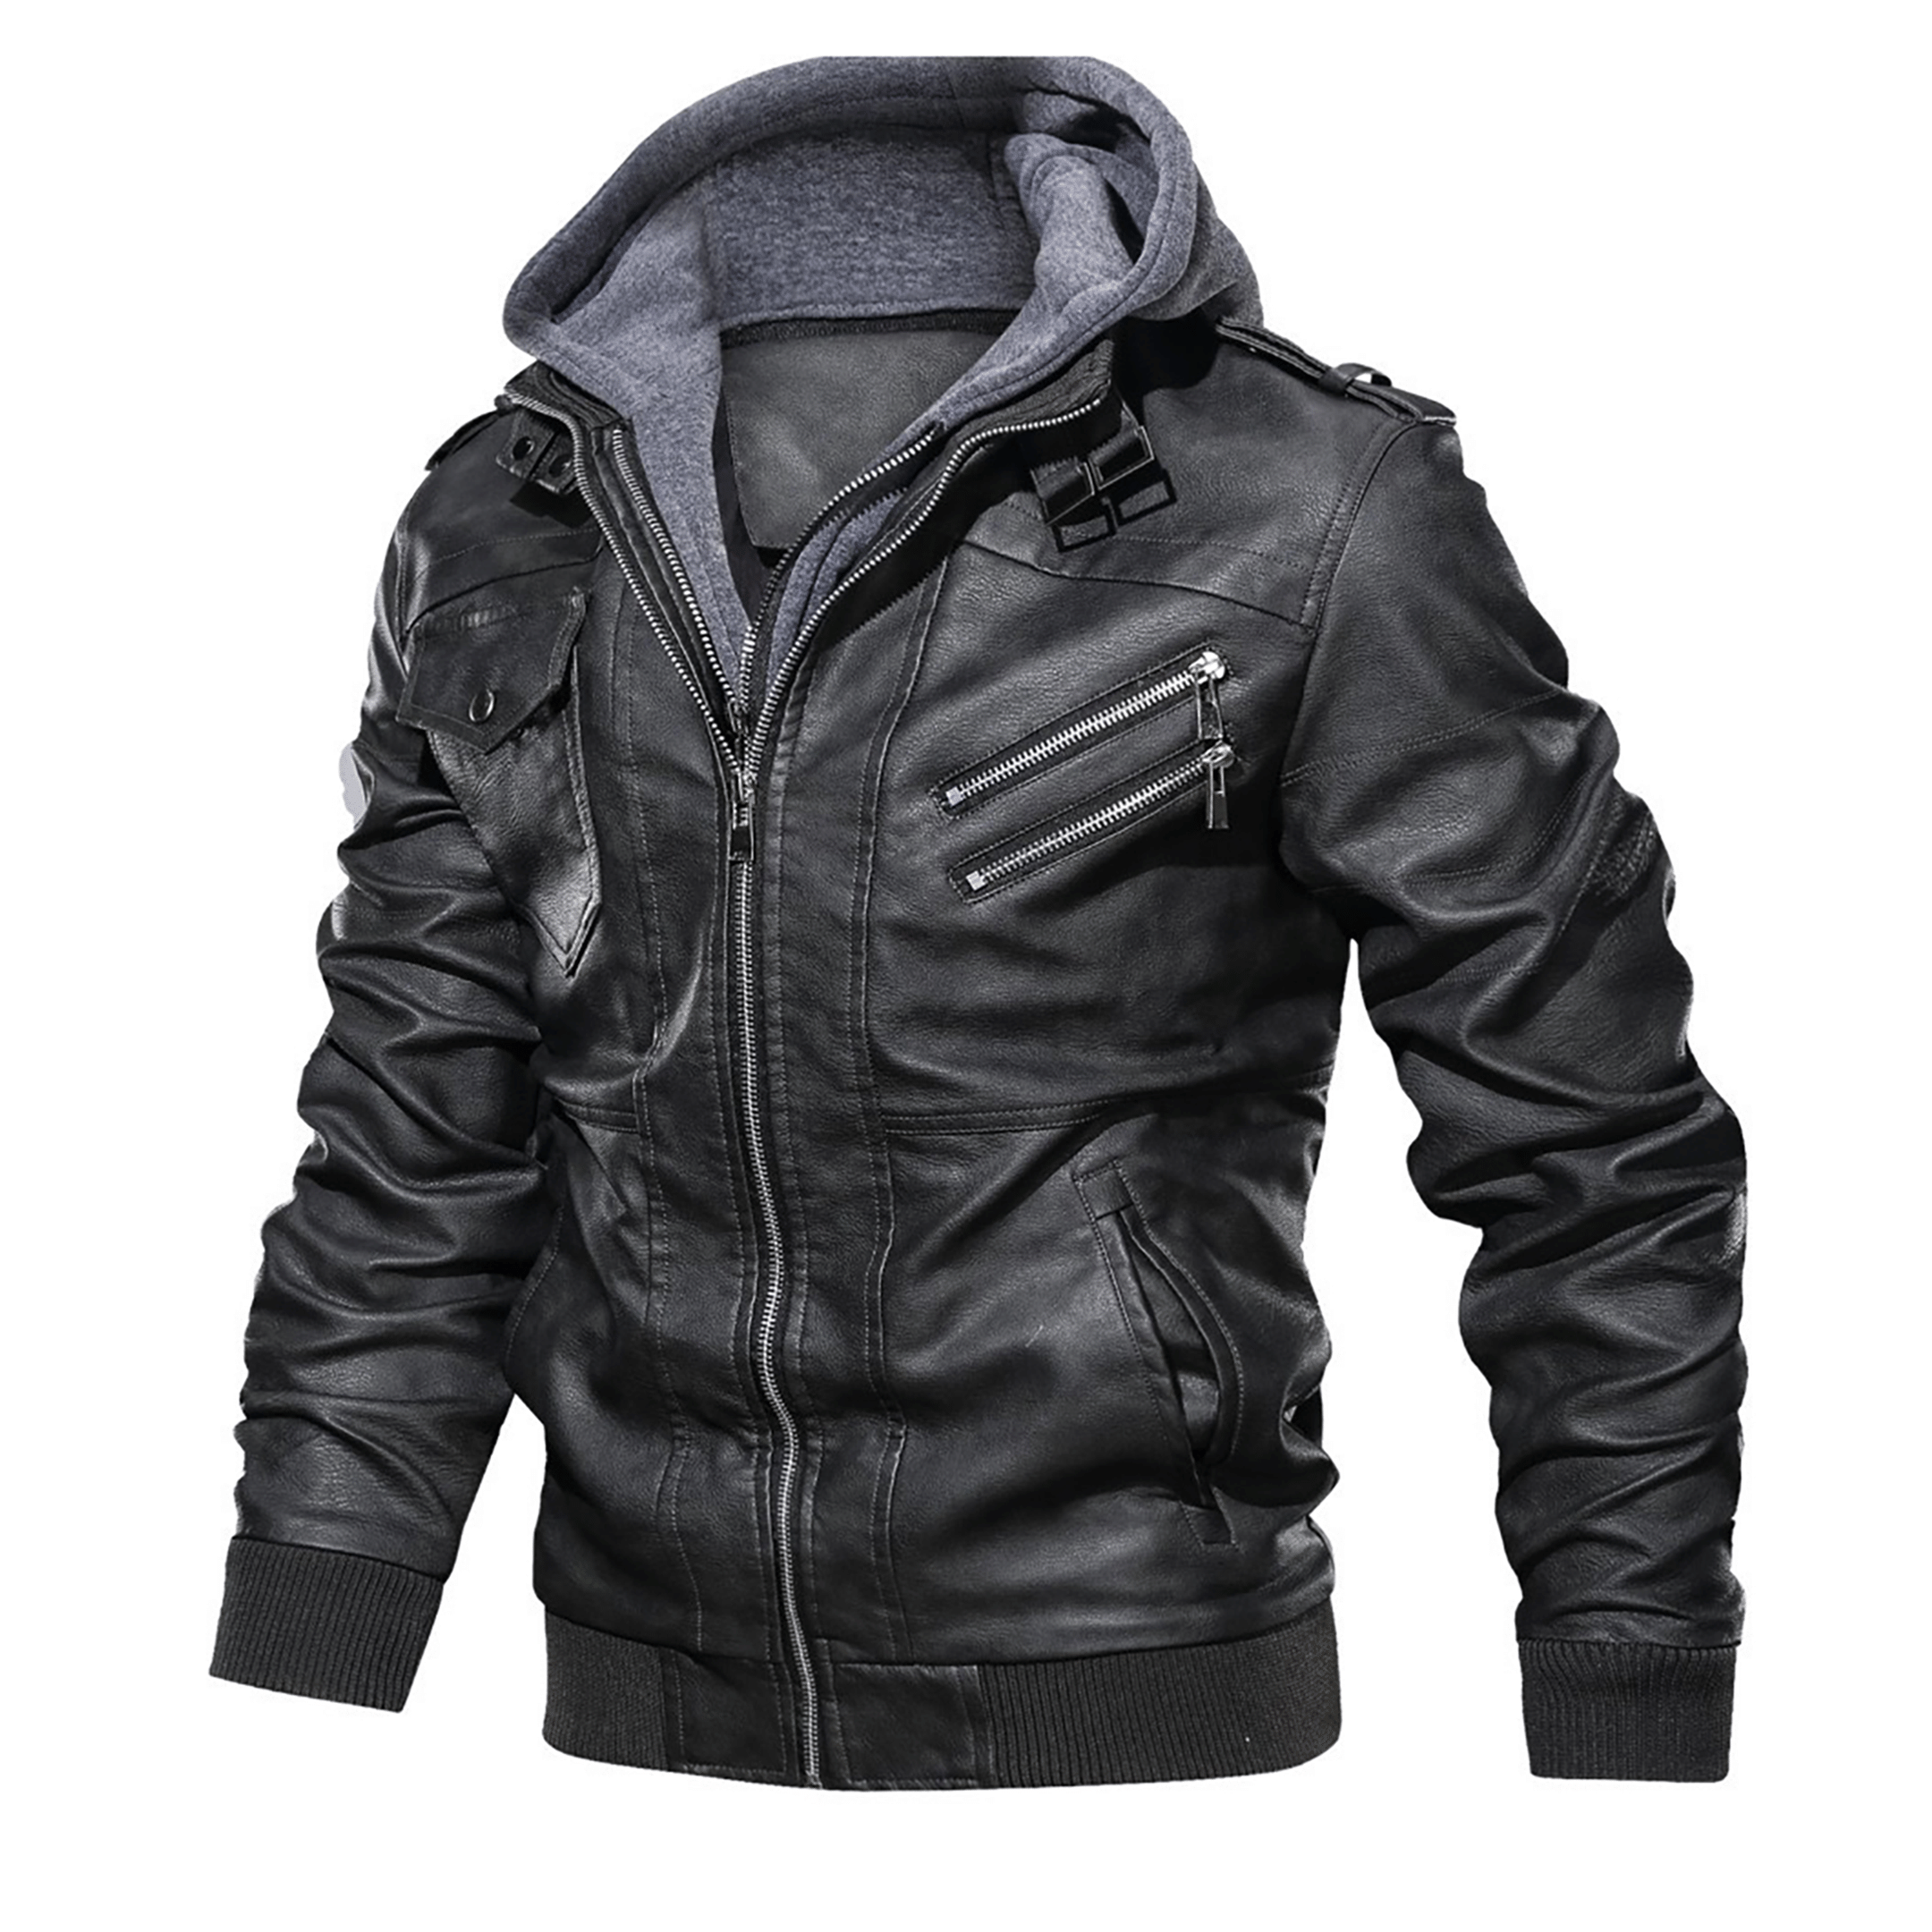 Top leather jackets and latest products 227